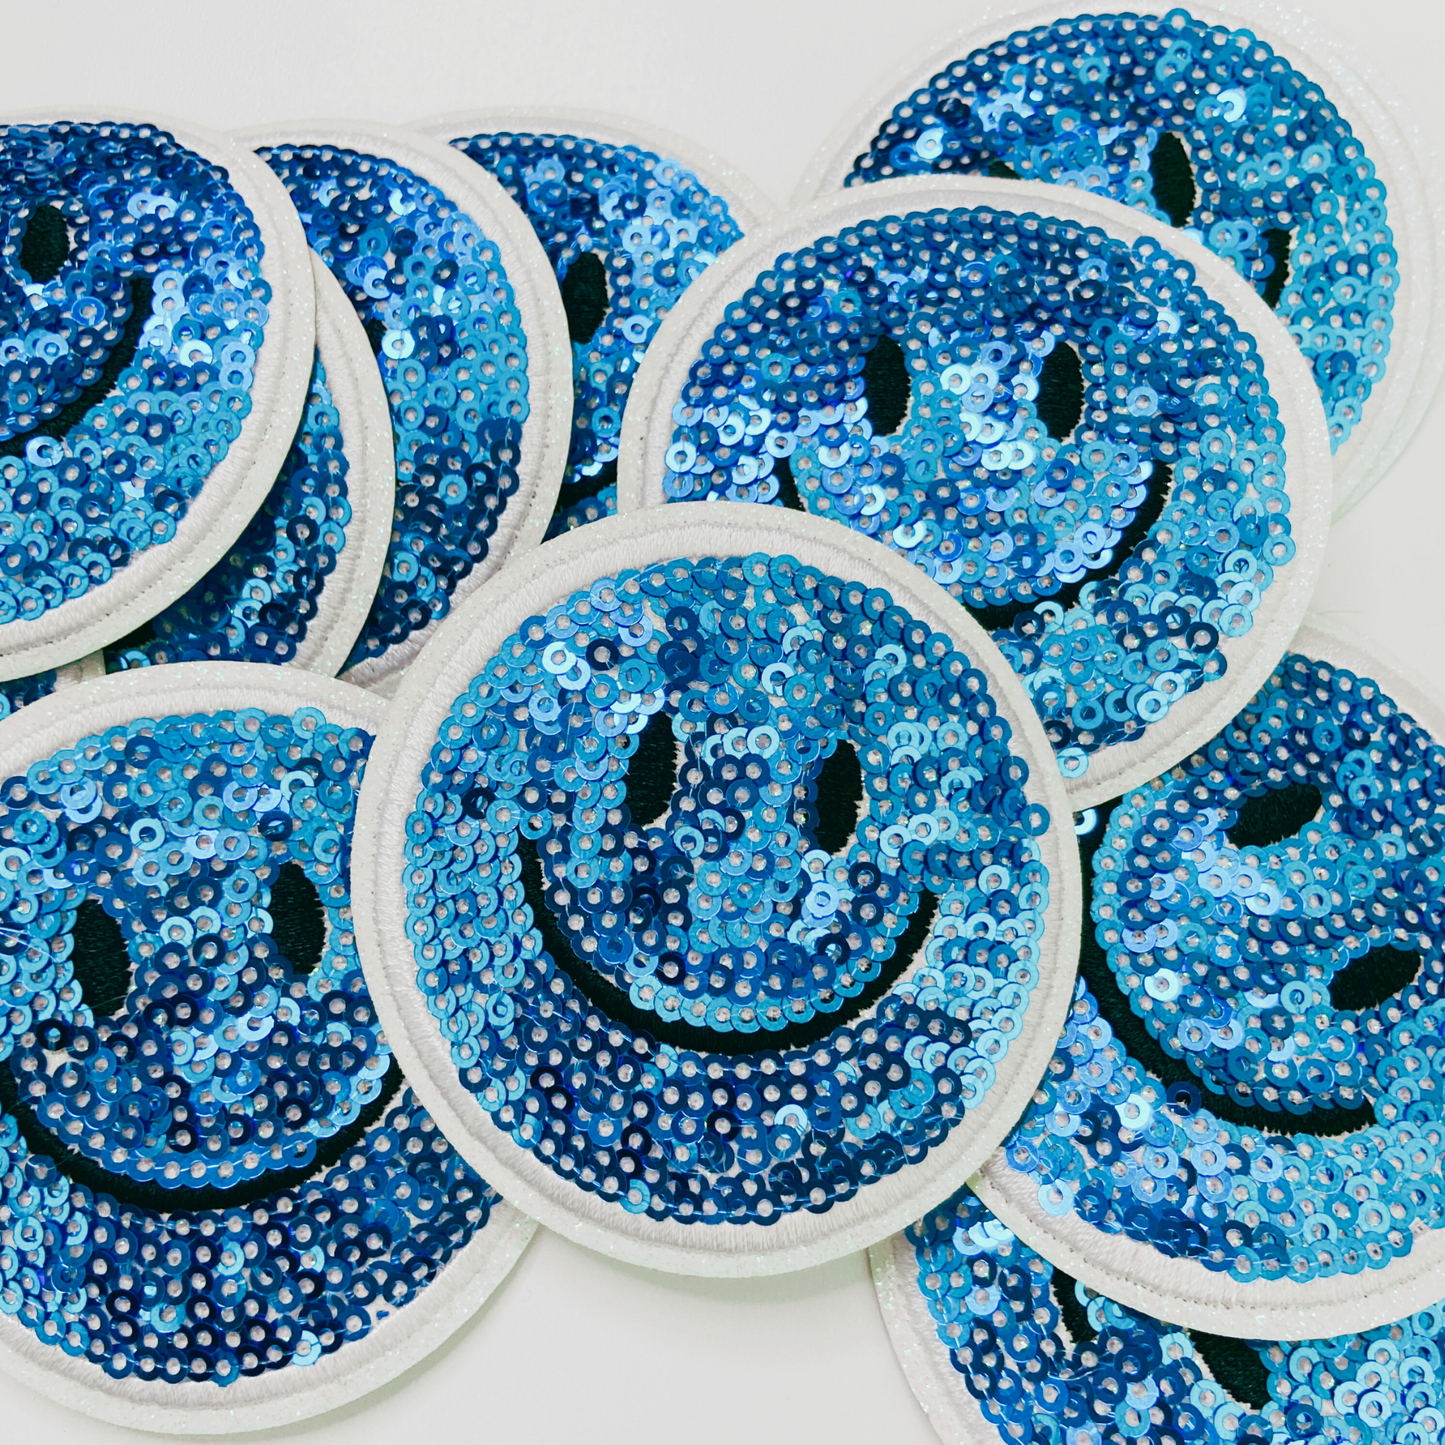 NEON Sequin Smiley Face Patch - 2.5" x 2.5"  - hat Patch